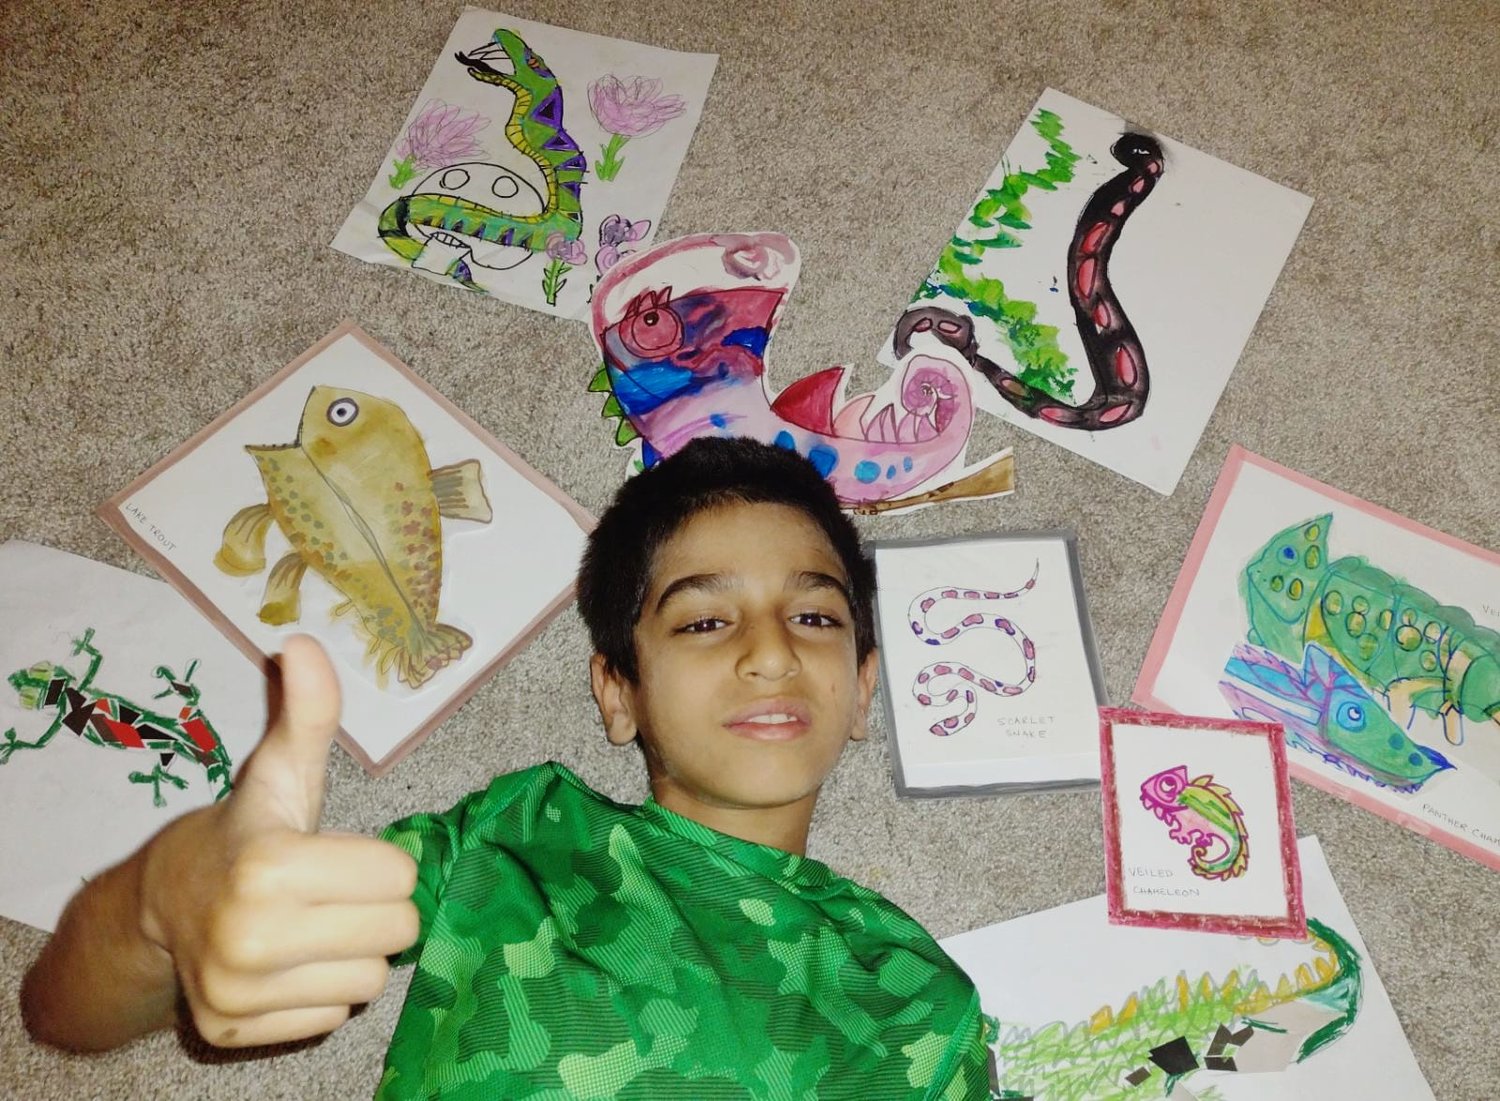 Khizar, a budding artist, poses with some of his artwork.